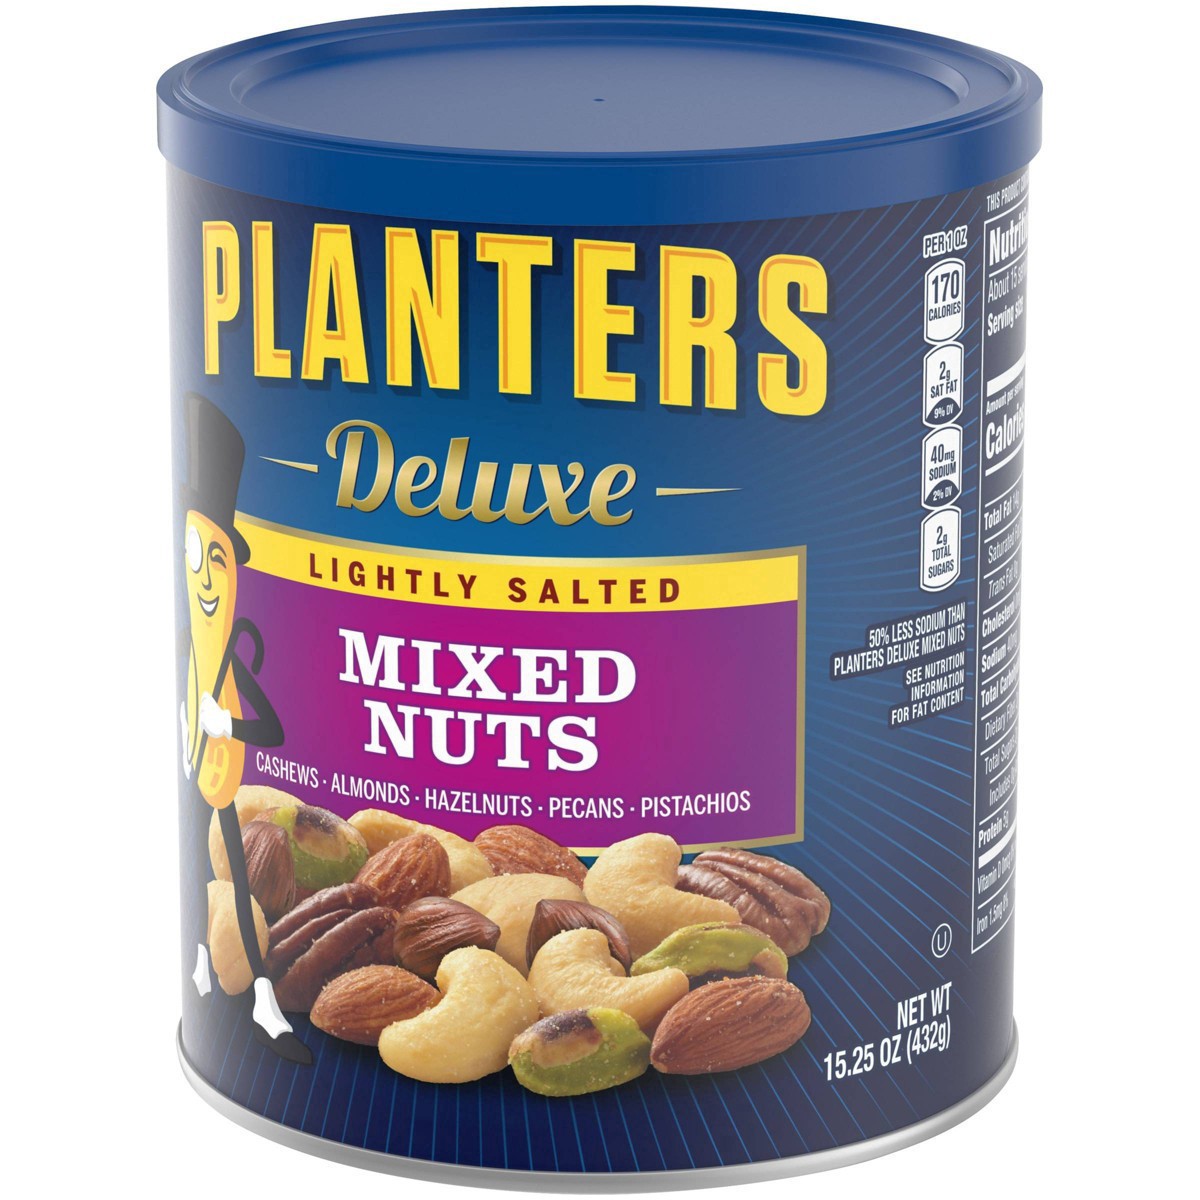 slide 14 of 46, Planters Deluxe Lightly Salted Mixed Nuts 15.25 oz, 15.25 oz